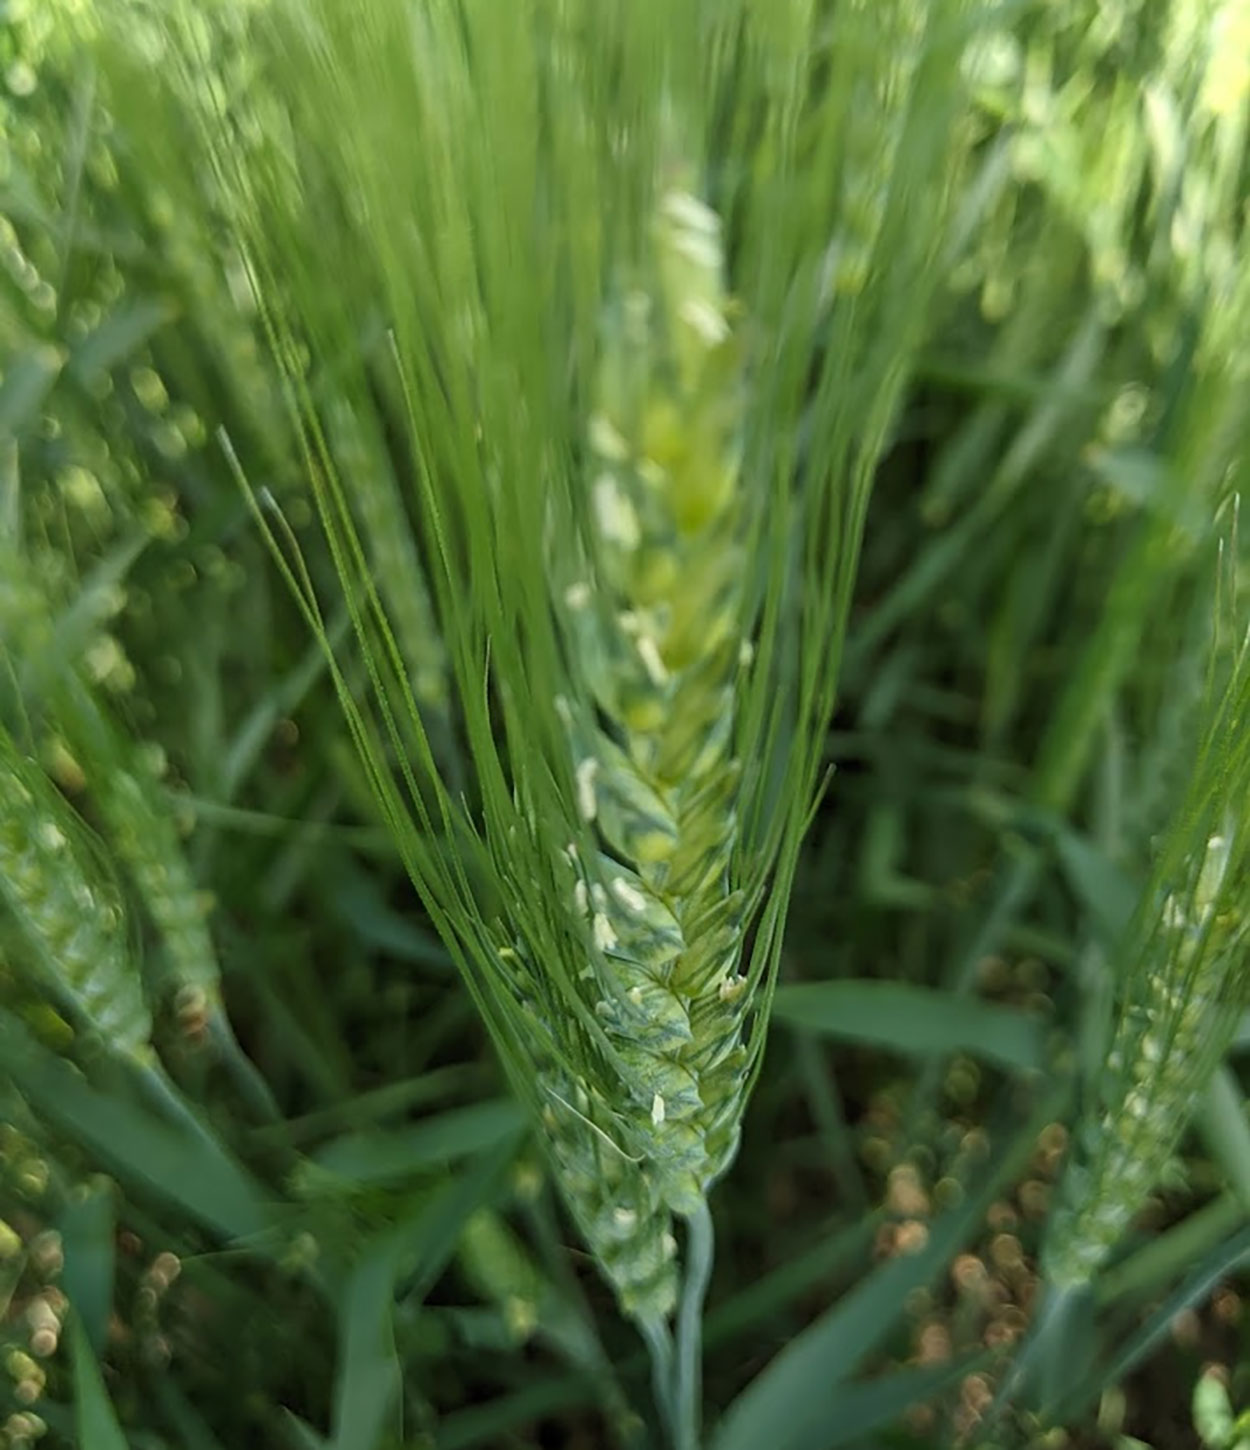 A wheat head showing the start of the flowering period. This growth stage is the best time to apply a fungicide to manage Fusarium head blight.